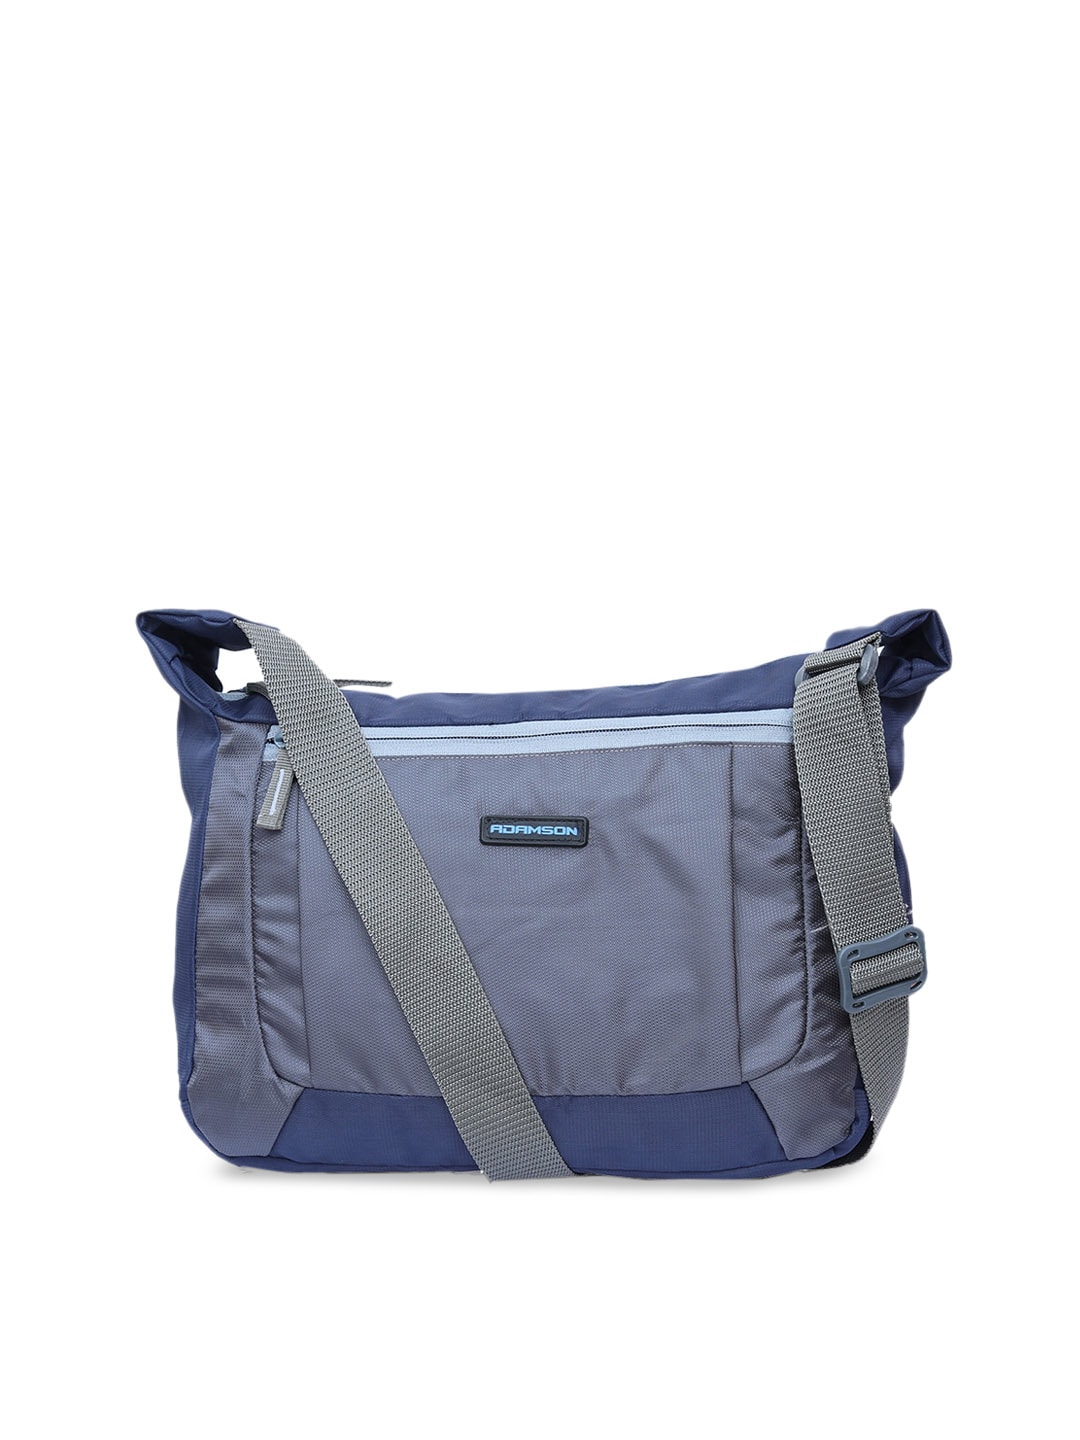 ADAMSON Blue Structured Sling Bag Price in India